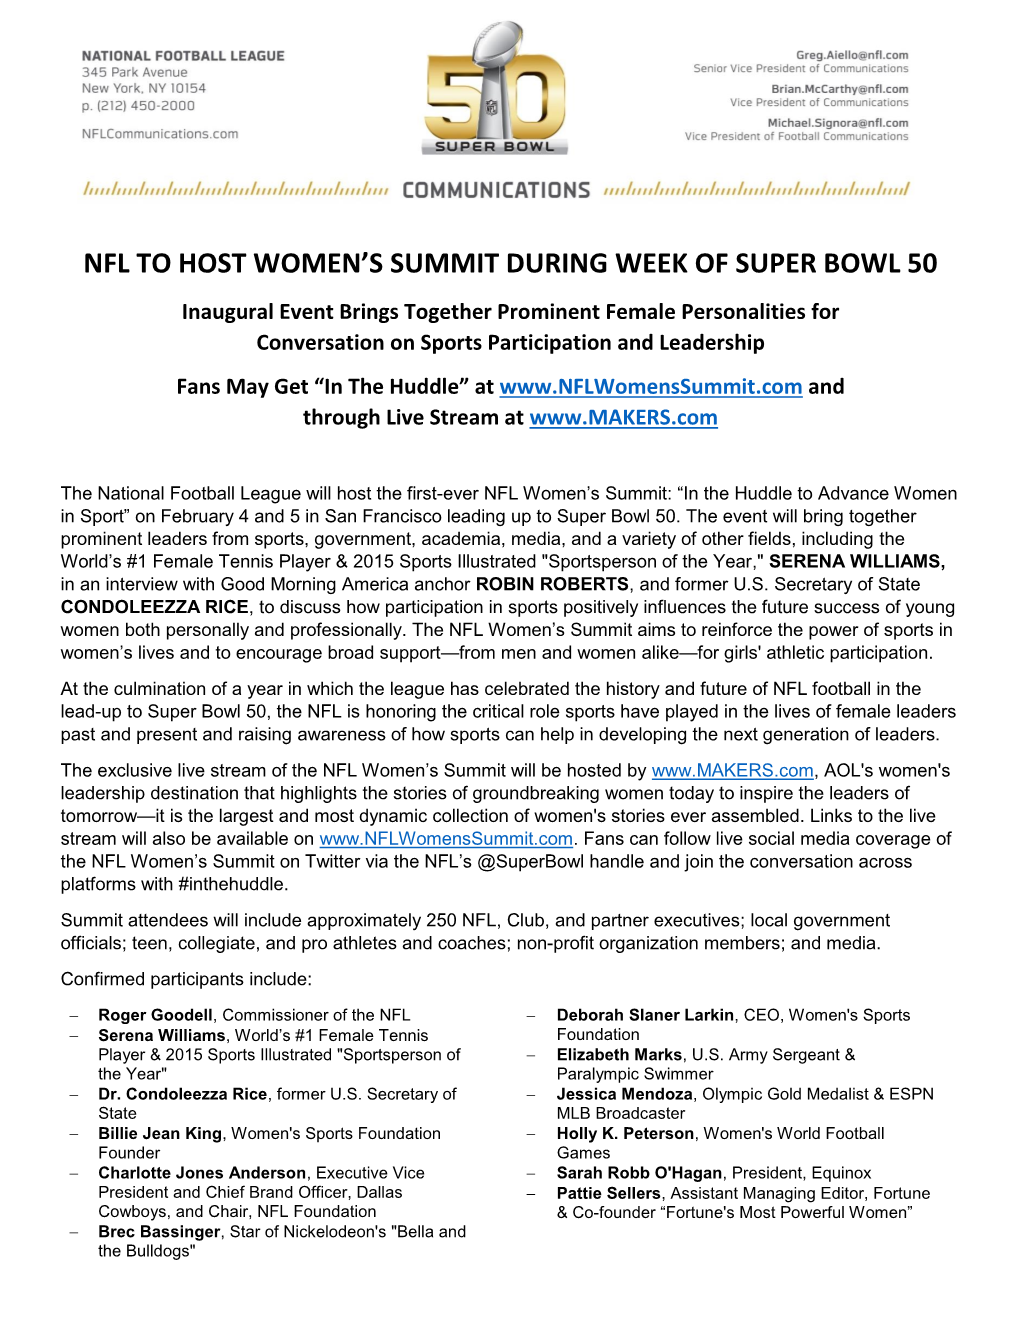 Nfl to Host Women's Summit During Week of Super Bowl 50